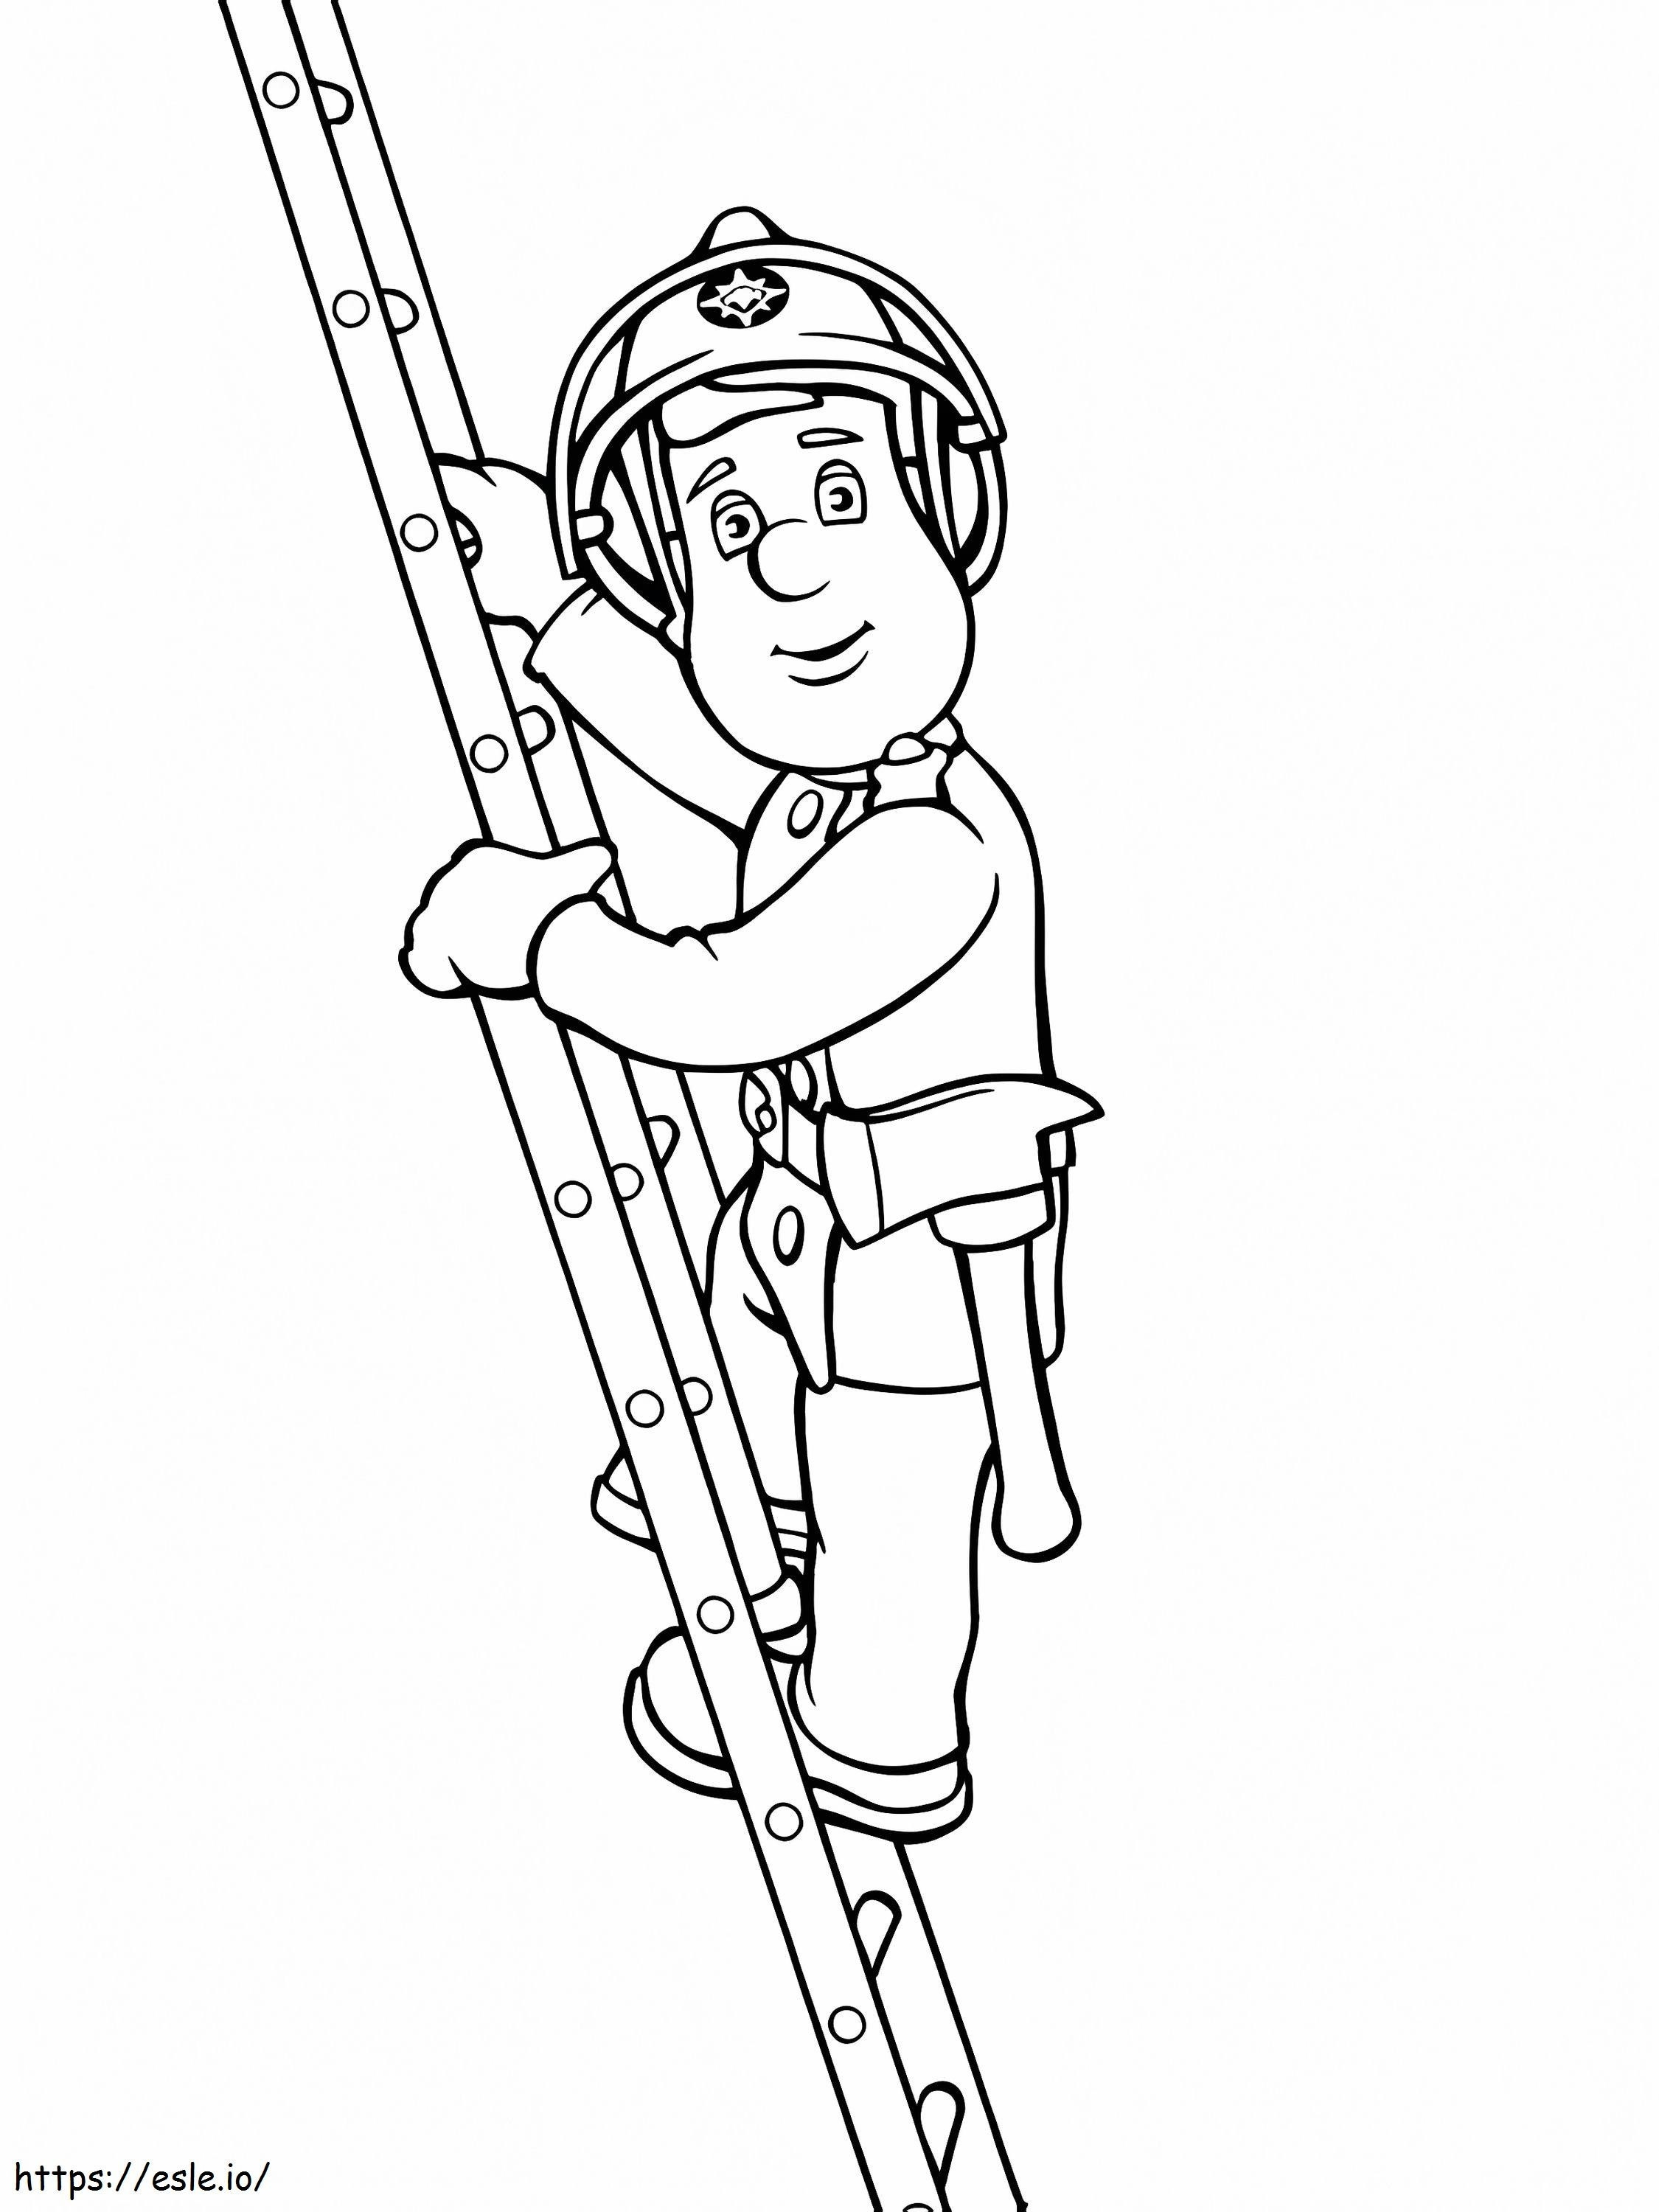 Fireman Sam Climbing The Ladder coloring page